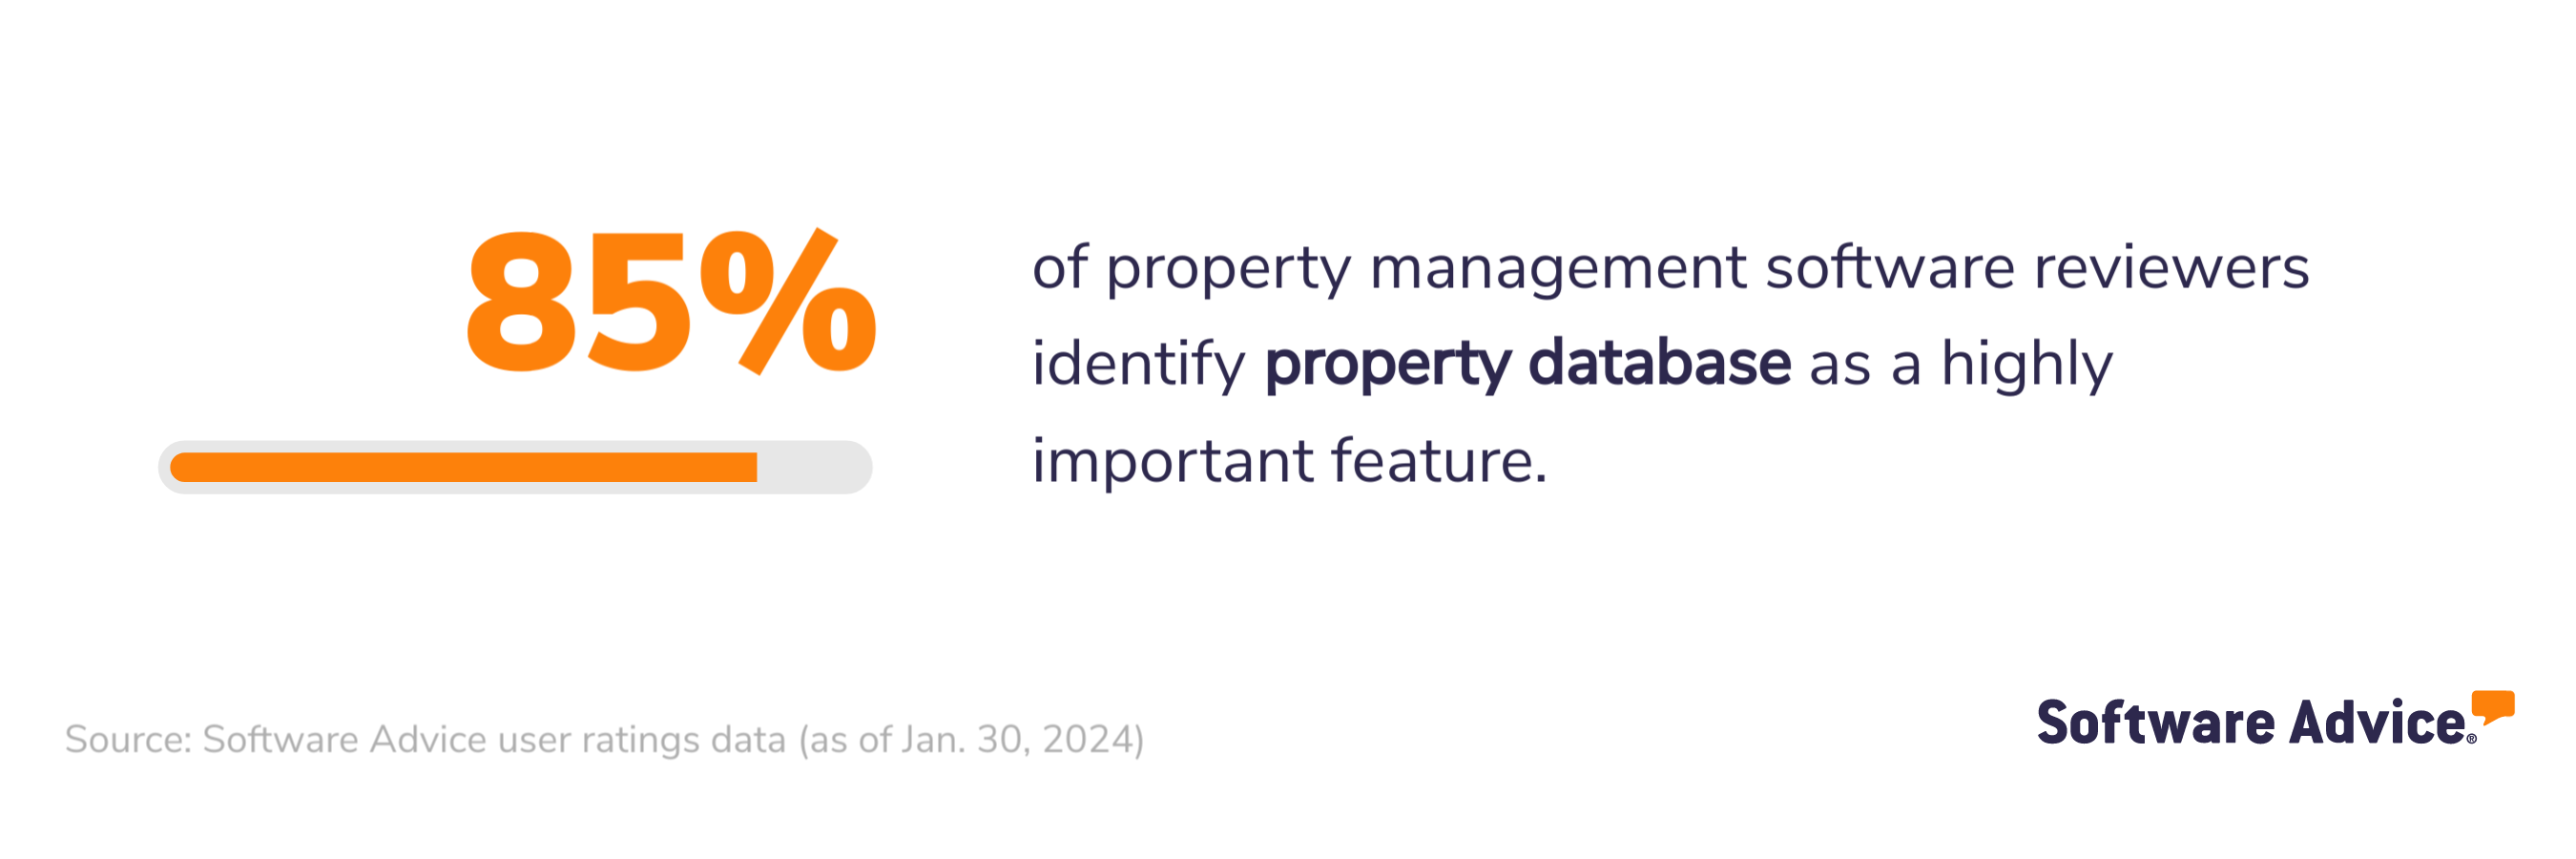 85% of property management software reviewers identify property database as a highly important feature. 